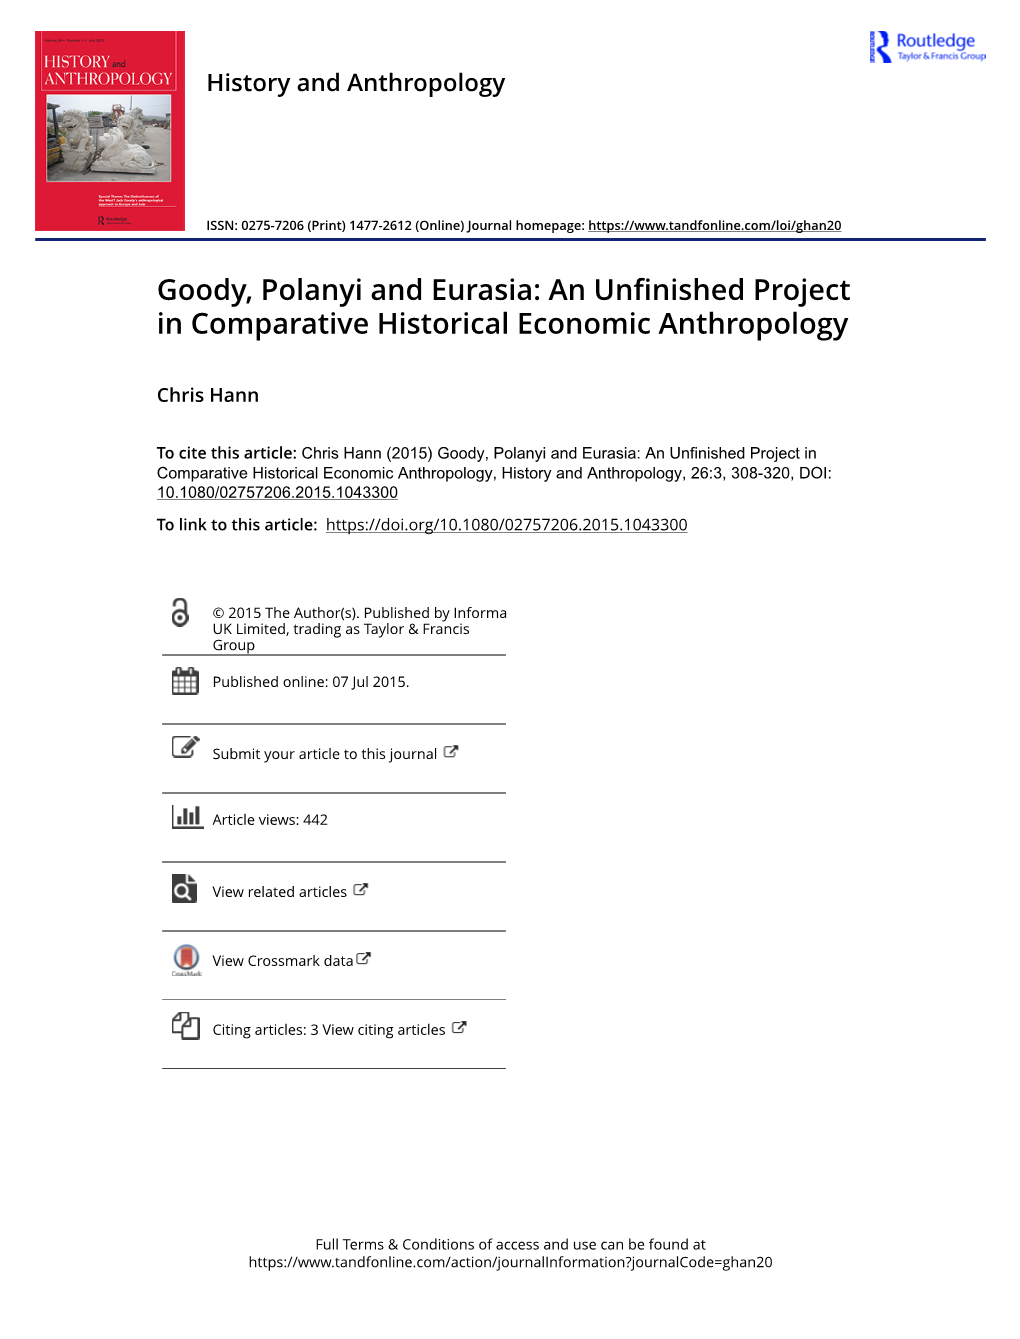 Goody, Polanyi and Eurasia: an Unfinished Project in Comparative Historical Economic Anthropology